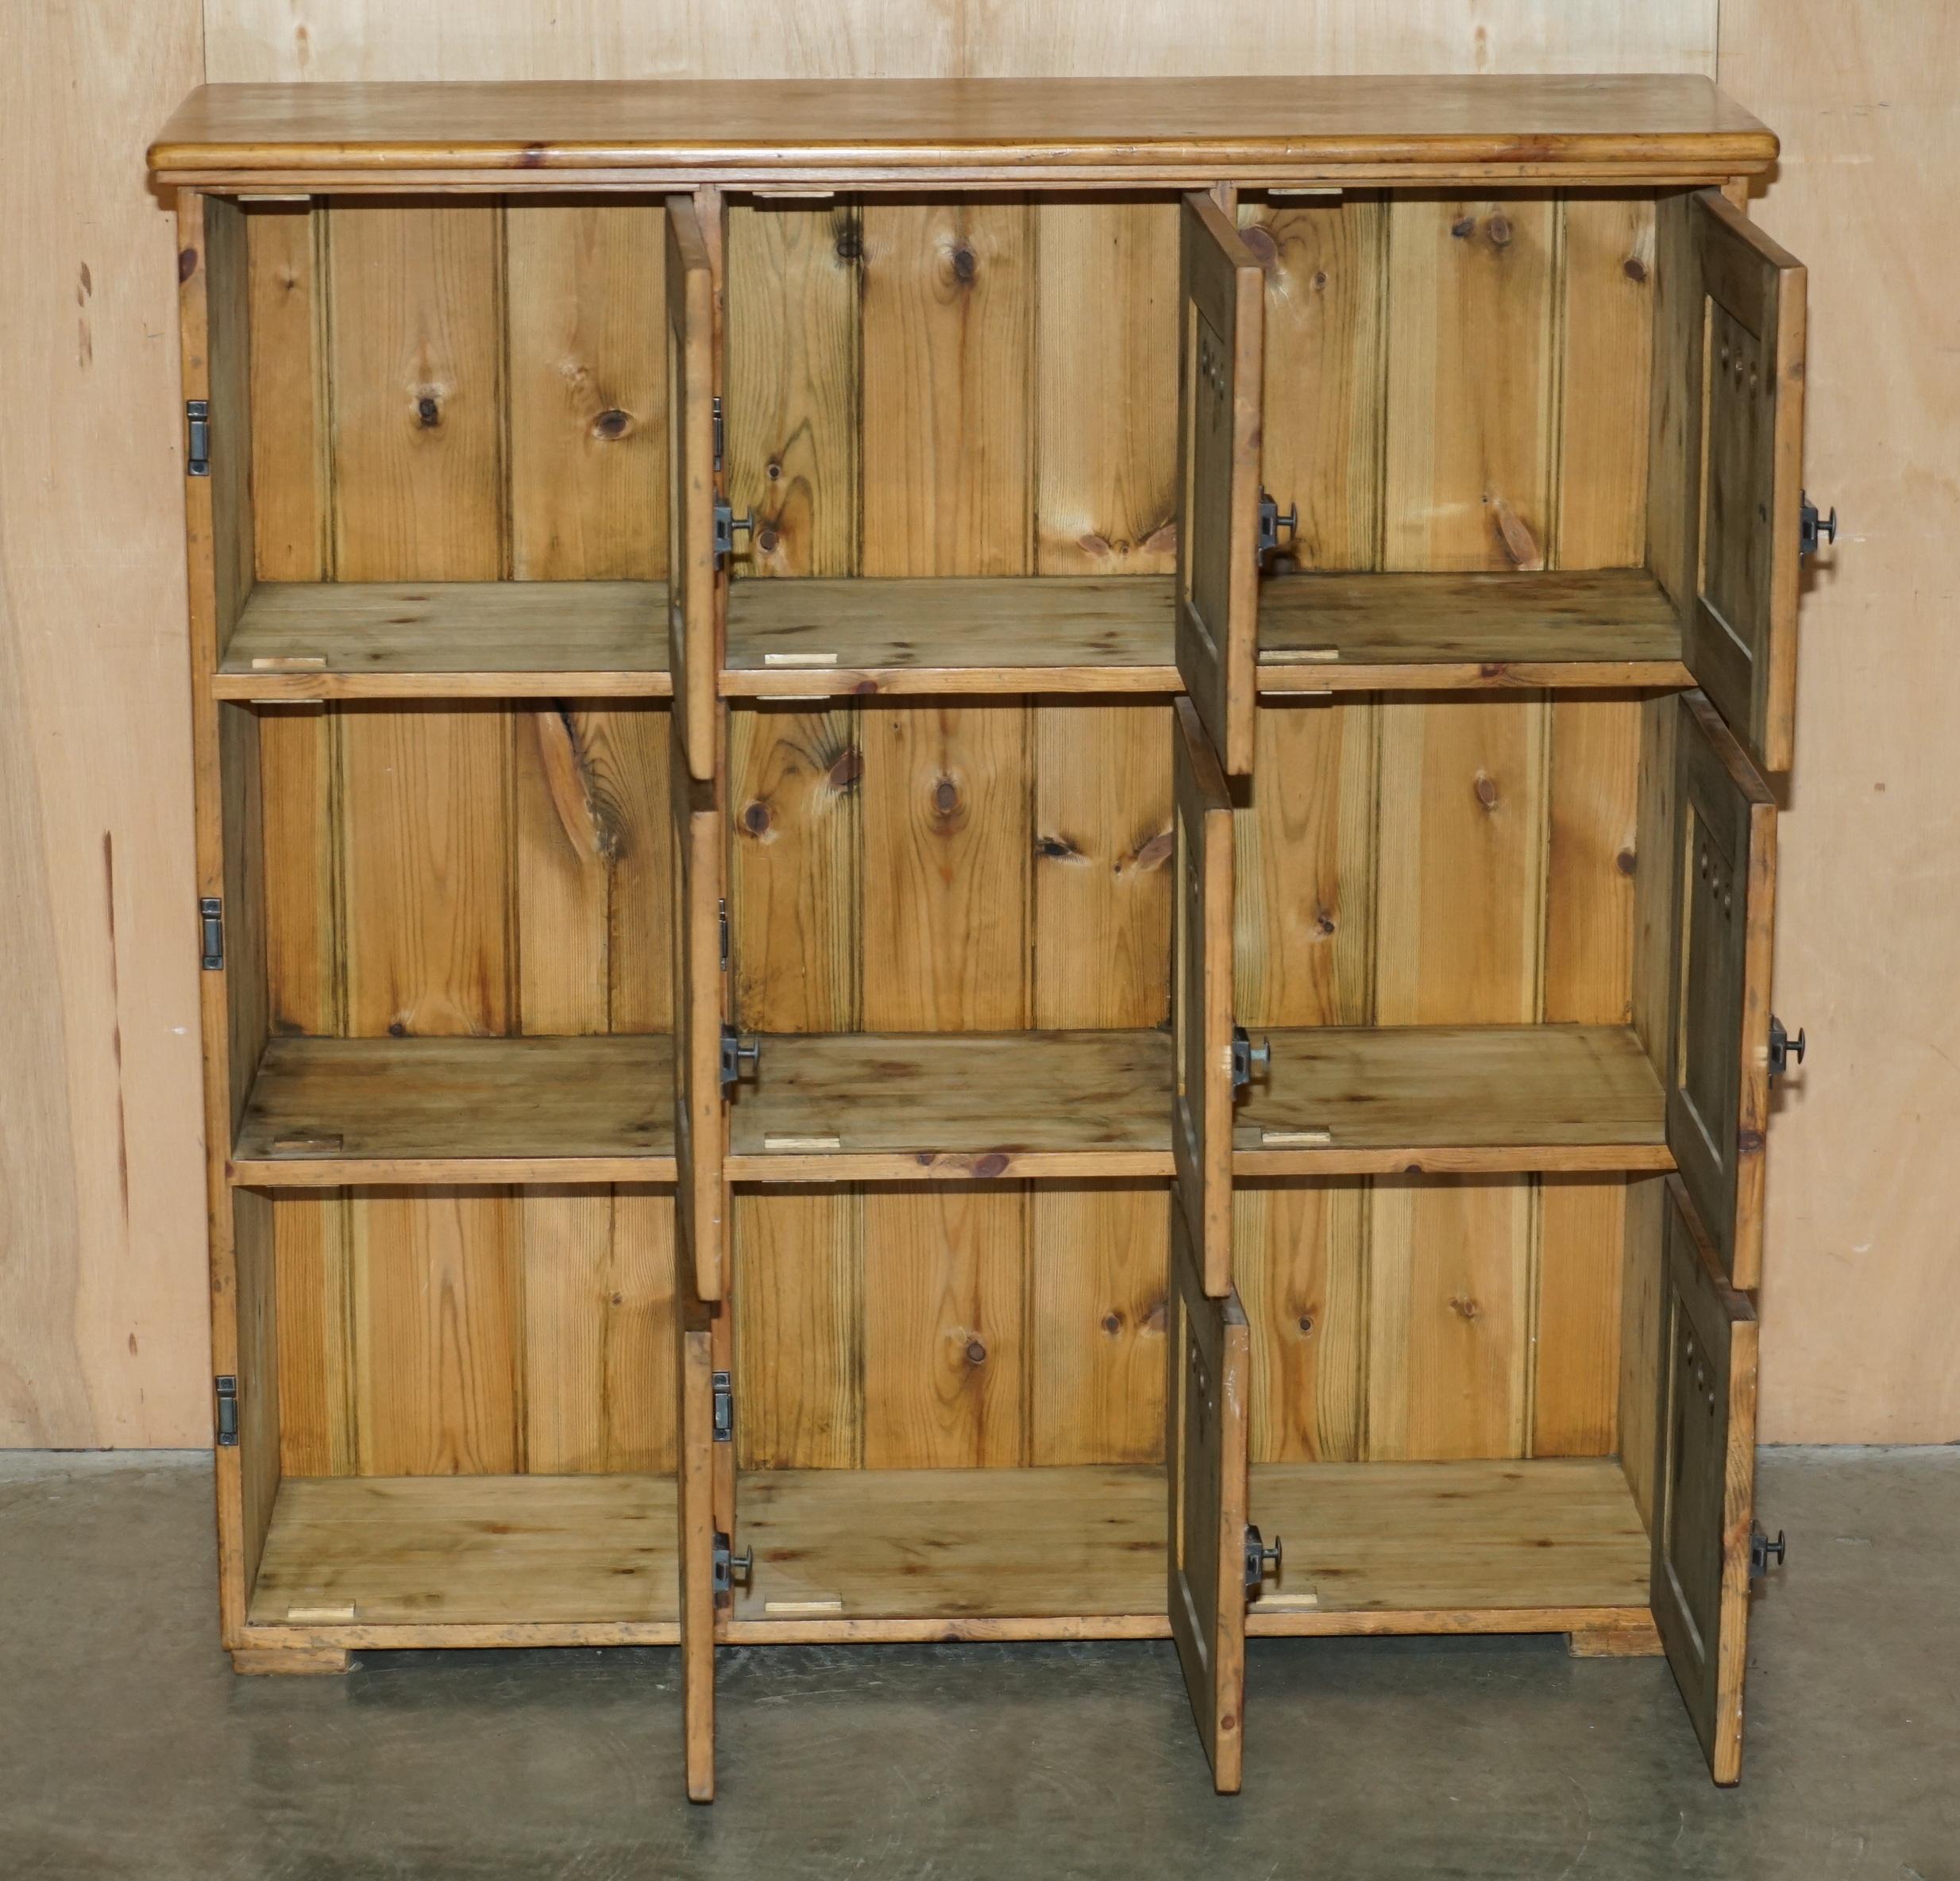 STUNNING ANTiQUE CIRCA 1930'S ENGLISH OAK LOCKER CABINET IDEAL FOR STORING SHOES For Sale 5